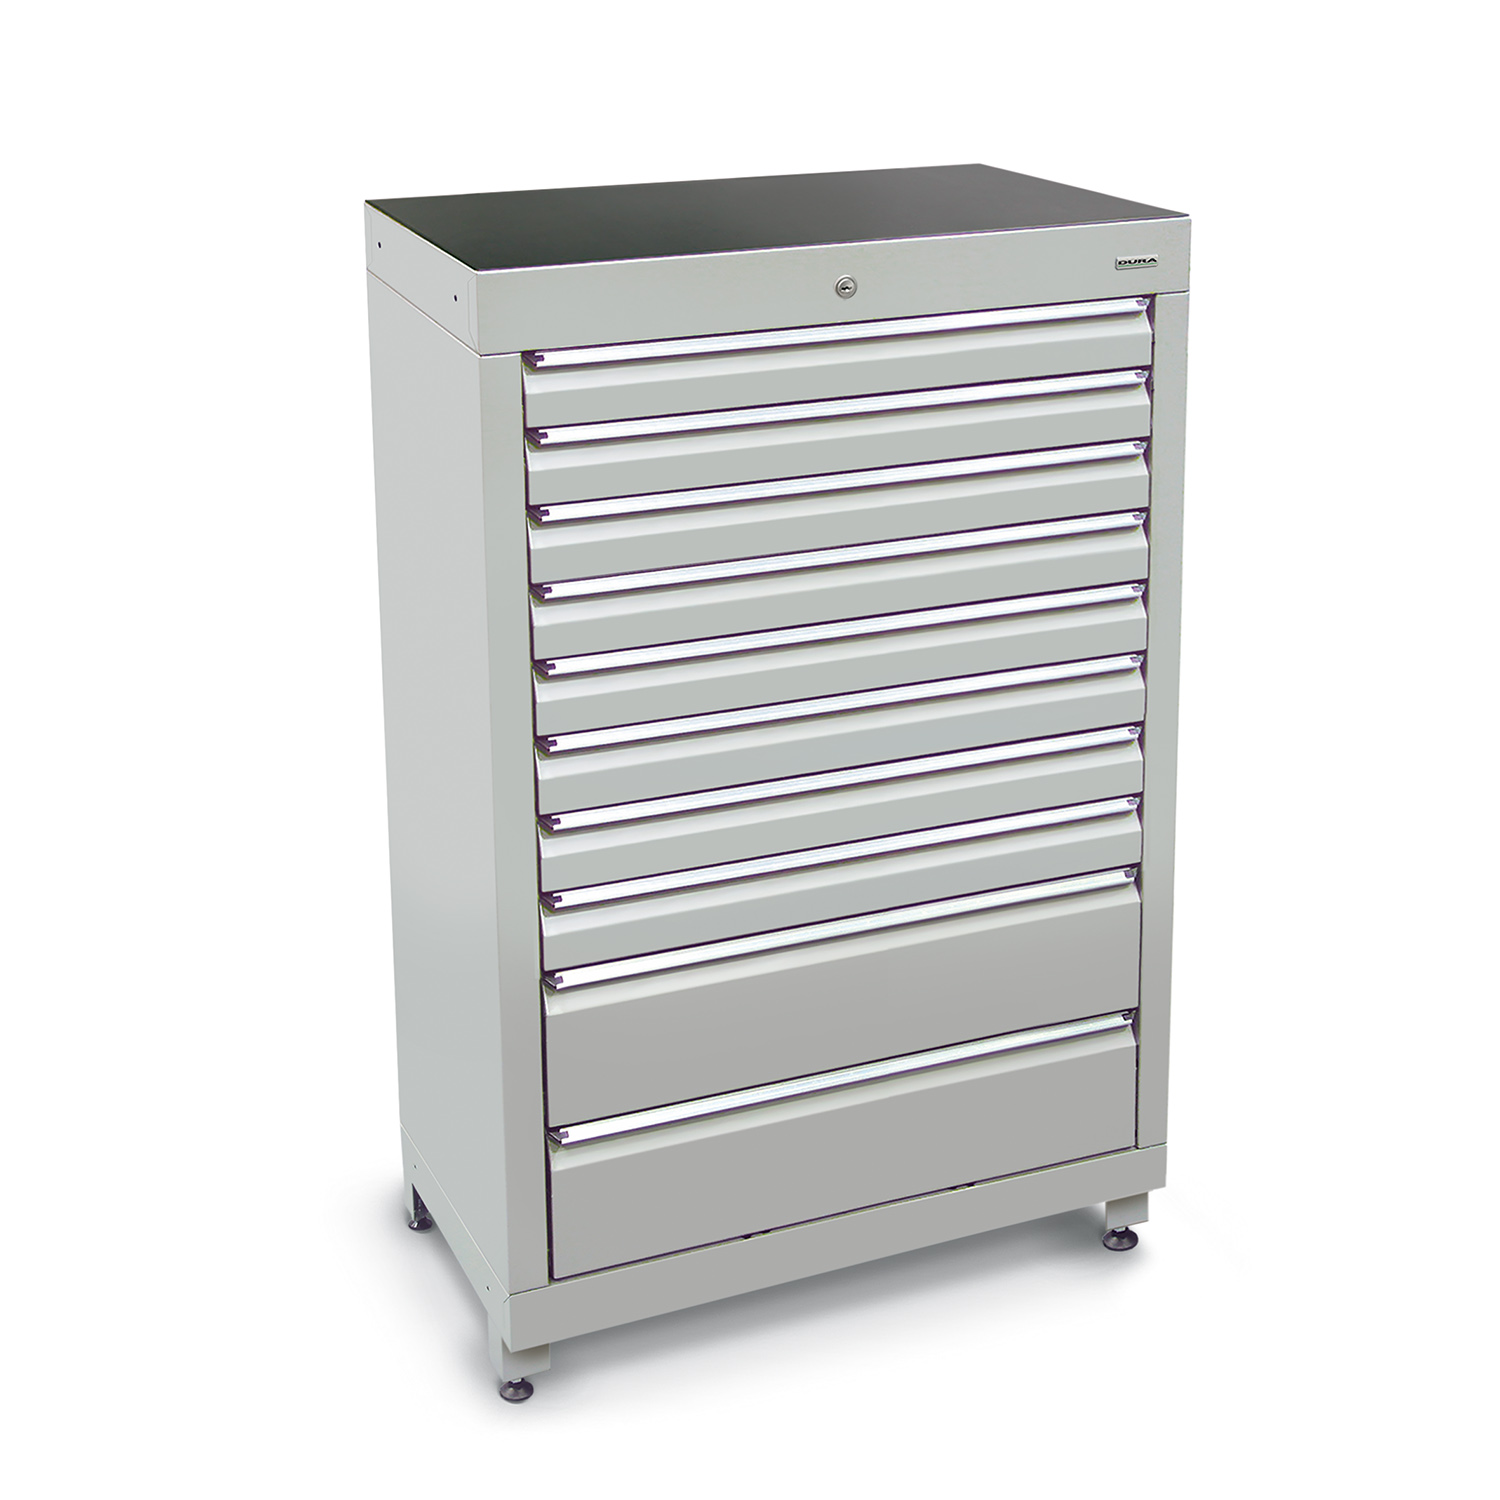 900mm Multi-drawer high tool cabinets with 10 drawers (8 medium, 2 large) and feet